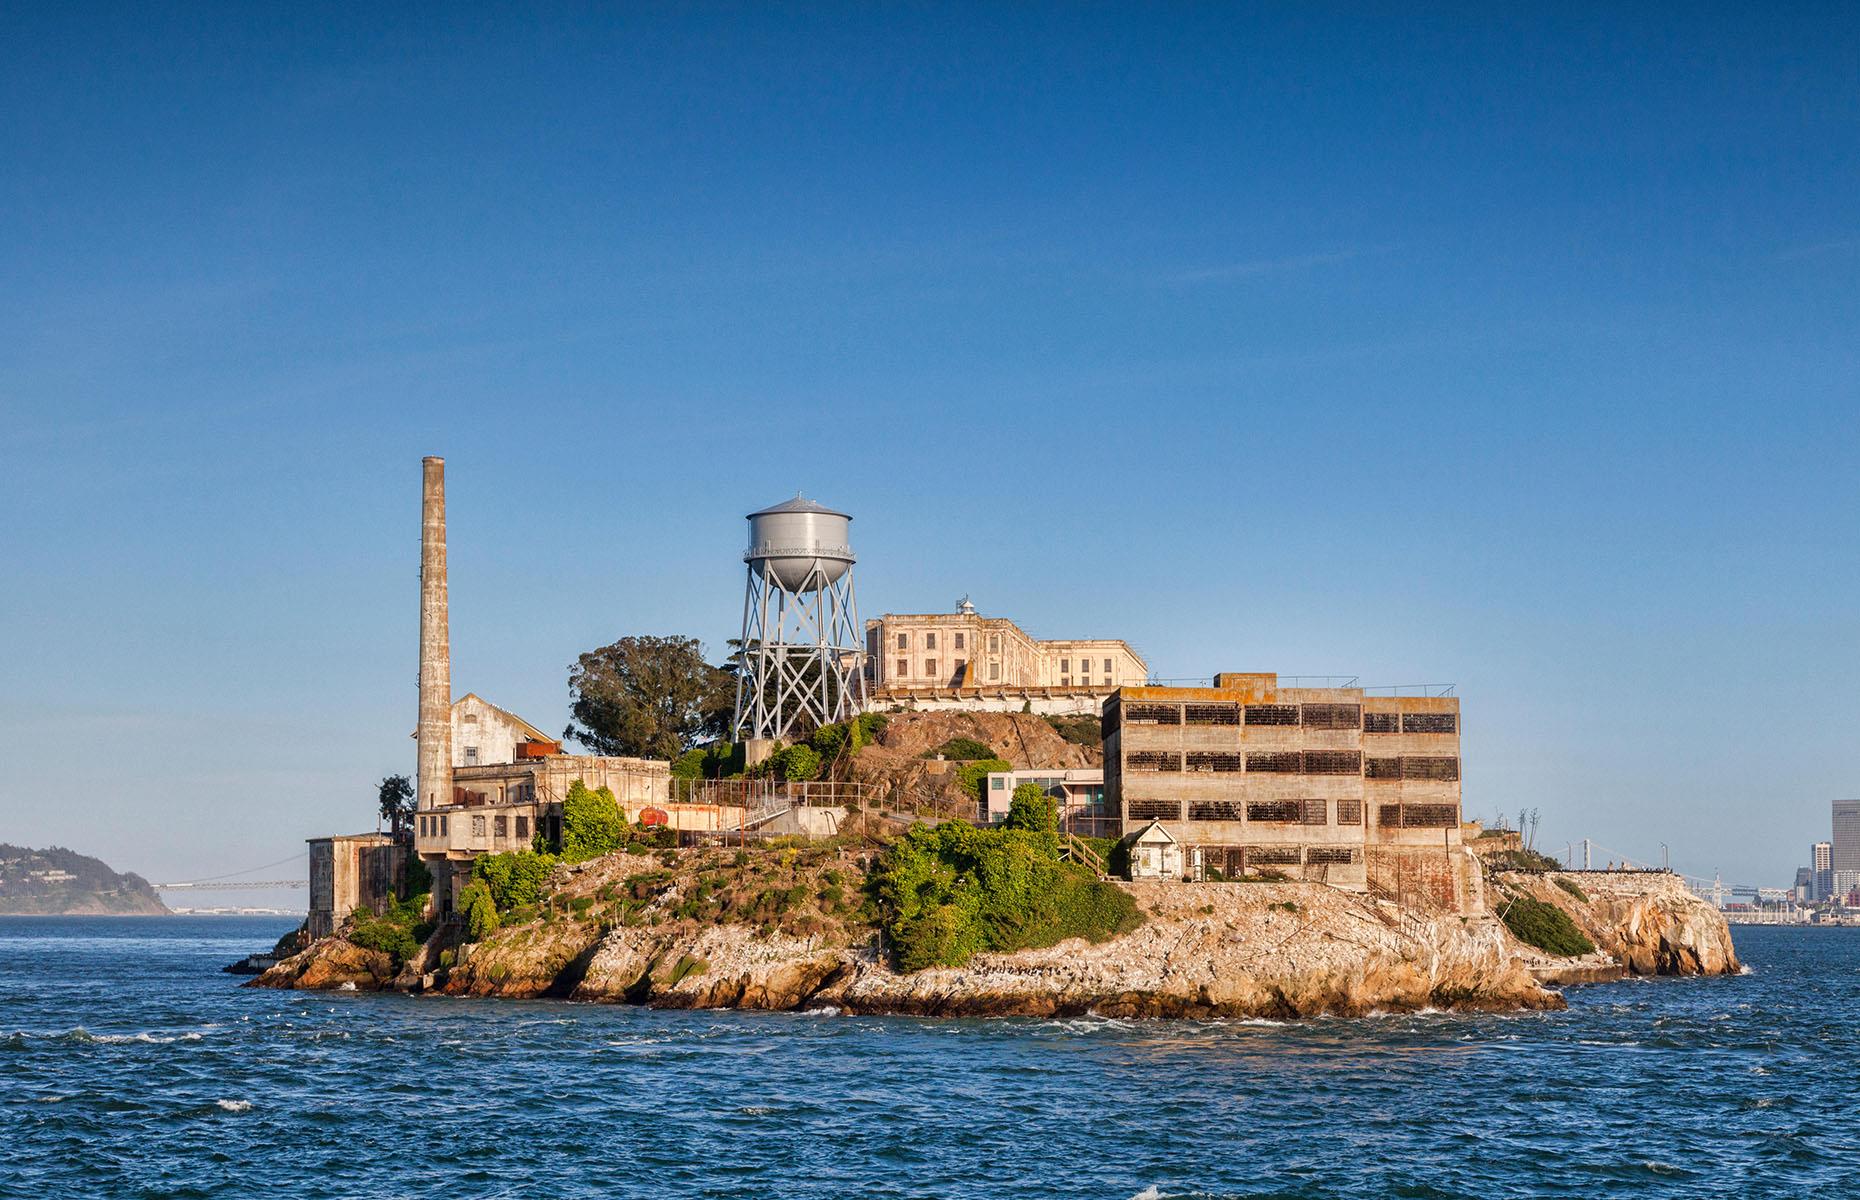 <p>Today Alcatraz is one of California’s – and the USA’s – most popular tourist attractions, with 1.3 million people visiting in 2022. And, happily, it’s being preserved for the future. Announced in 2022, some $35 million of federal funds have been set aside to make improvements at the NPS site, including improvements to the island’s concrete wharf and its infamous cellhouse.</p>  <p><a href="https://www.loveexploring.com/galleries/198453/the-fascinating-story-and-secrets-of-the-hollywood-sign?page=1"><strong>Read on to learn the fascinating story of the Hollywood Sign</strong></a></p>